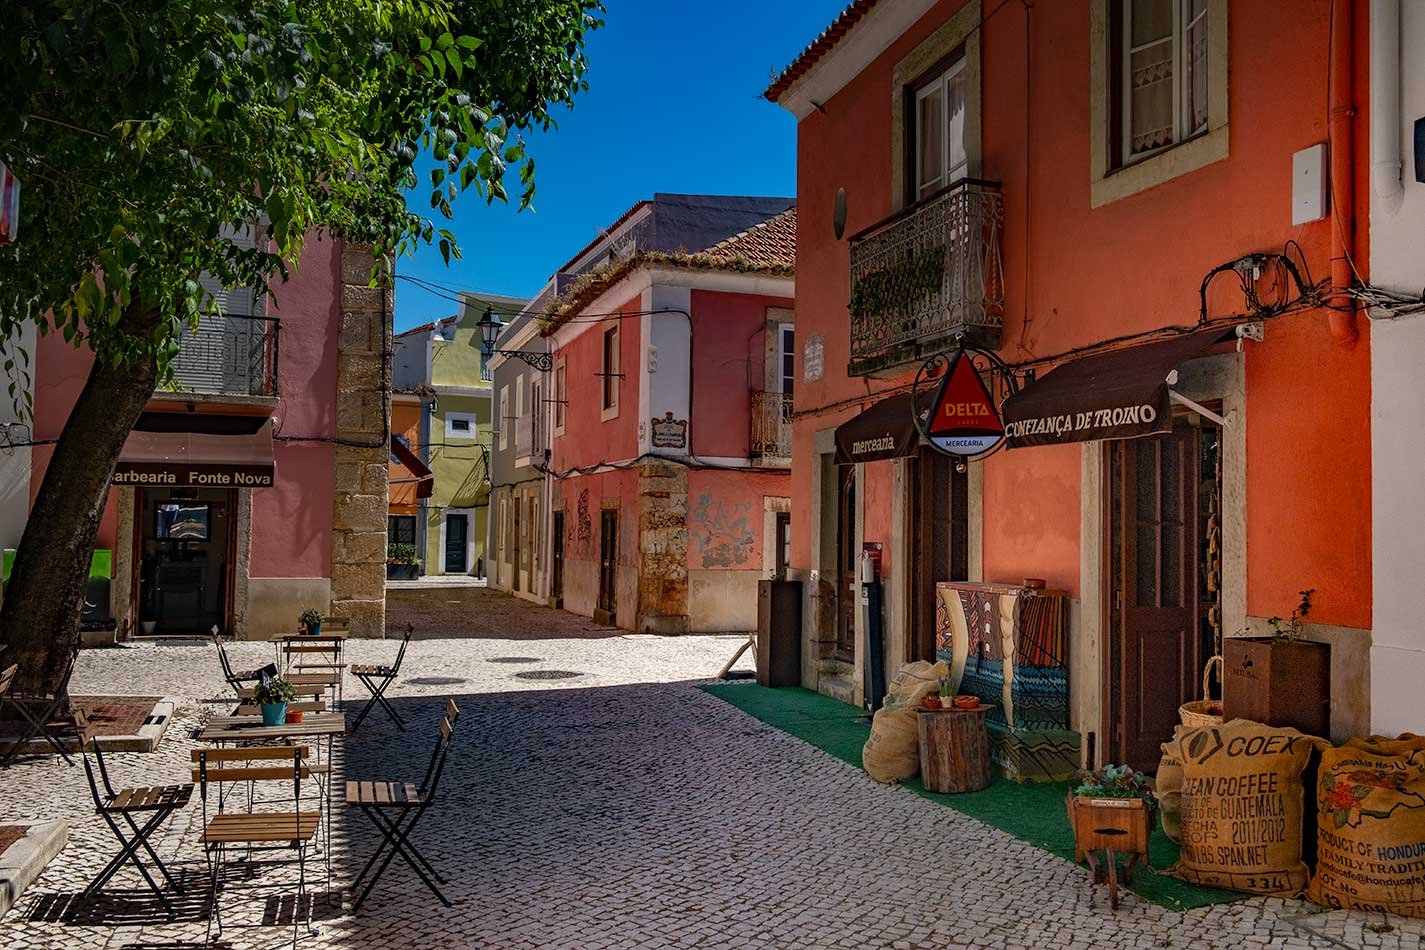 Cobblestone street in Setubal's old town, lined with colorful buildings, quaint cafes, and hanging decorations, creating a vibrant and inviting atmosphere.